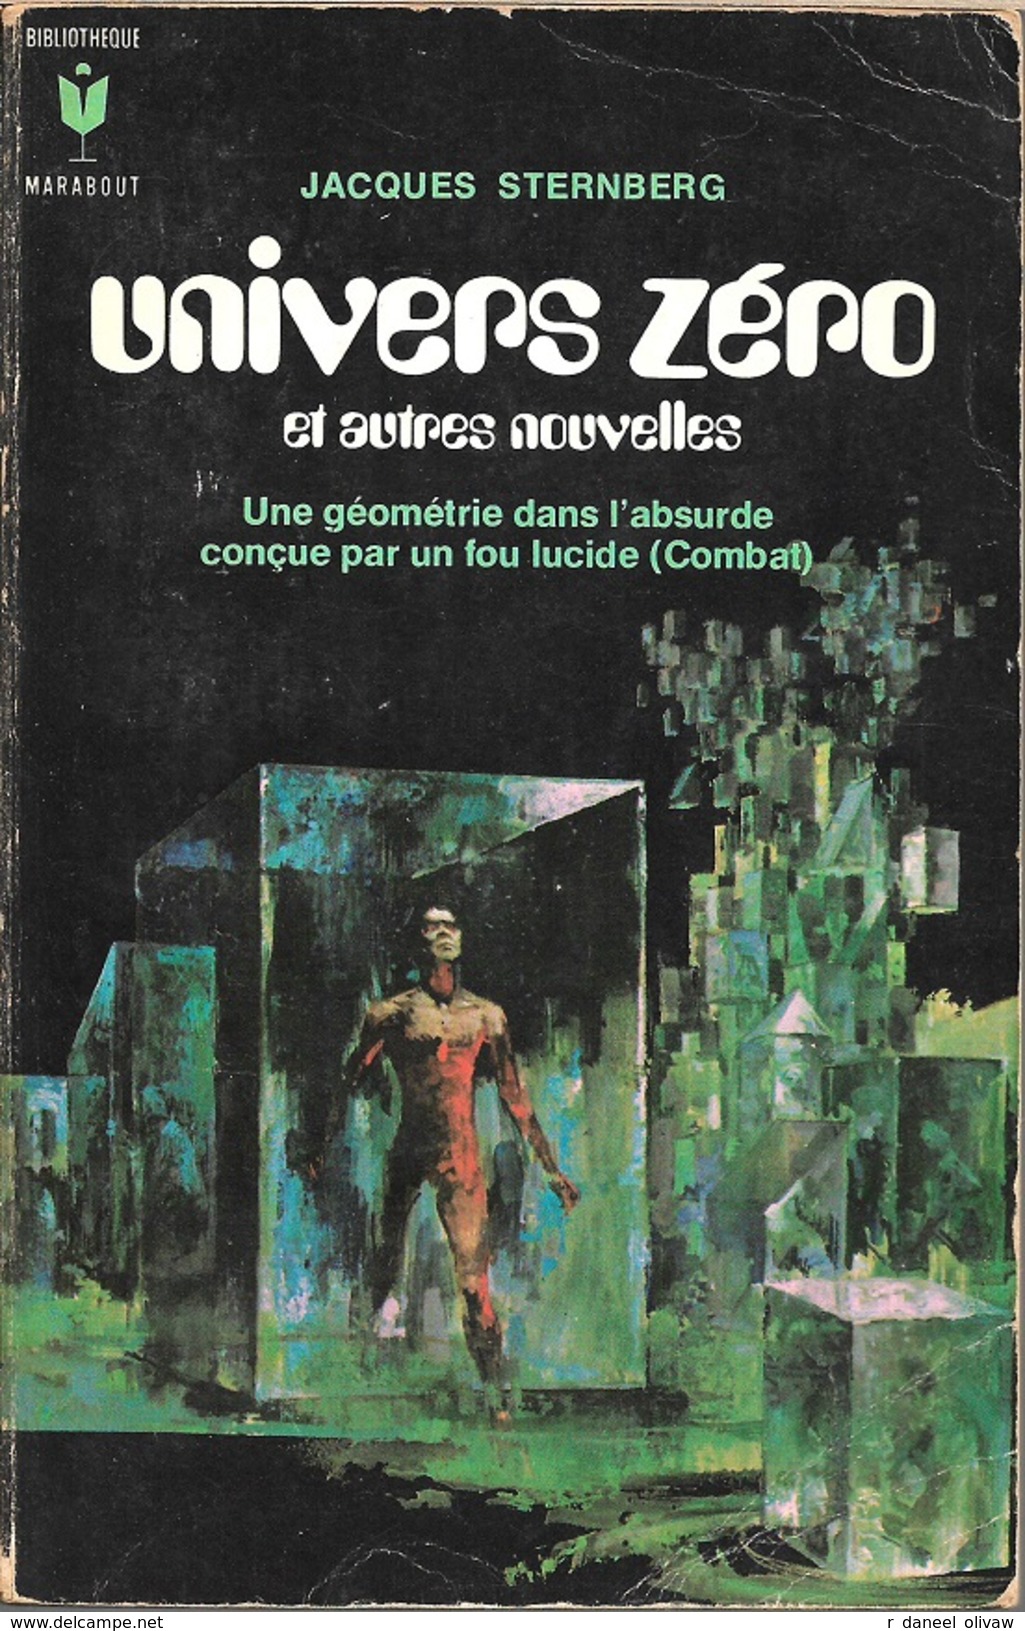 Marabout 362 - STERNBERG, Jacques - Univers Zéro (BE+) - Marabout SF